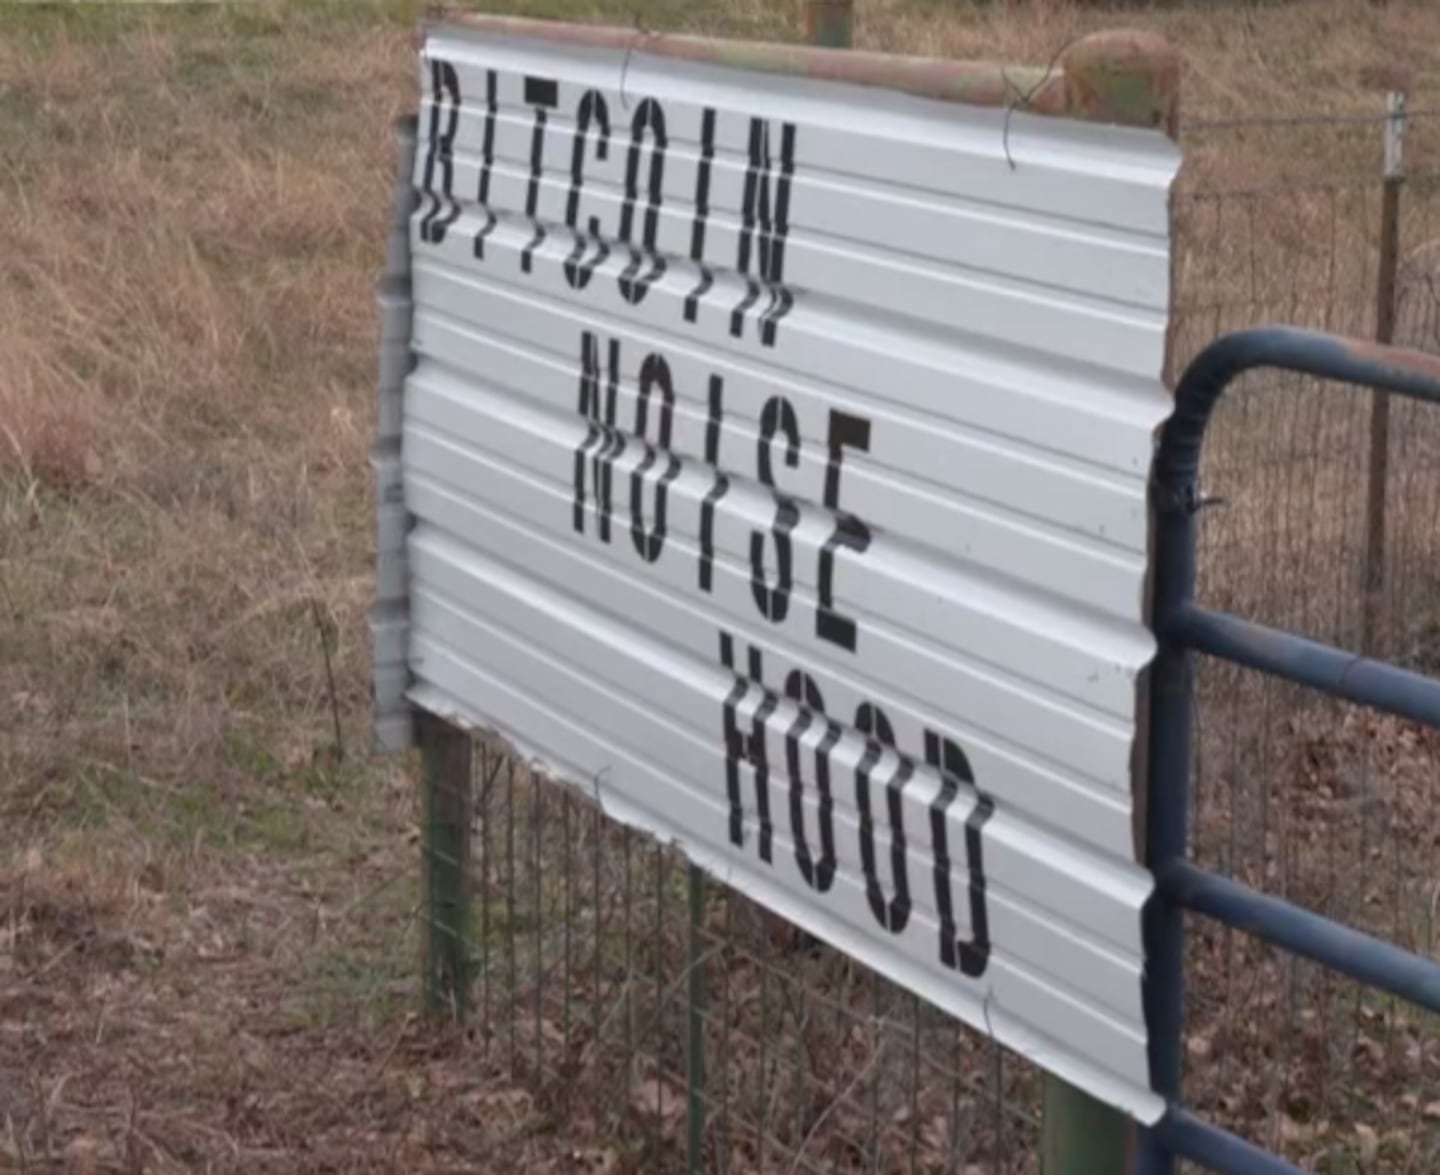 A “Bitcoin Noise Hood” sign outside of Cheryl Shadden’s property. Source: ABC News.